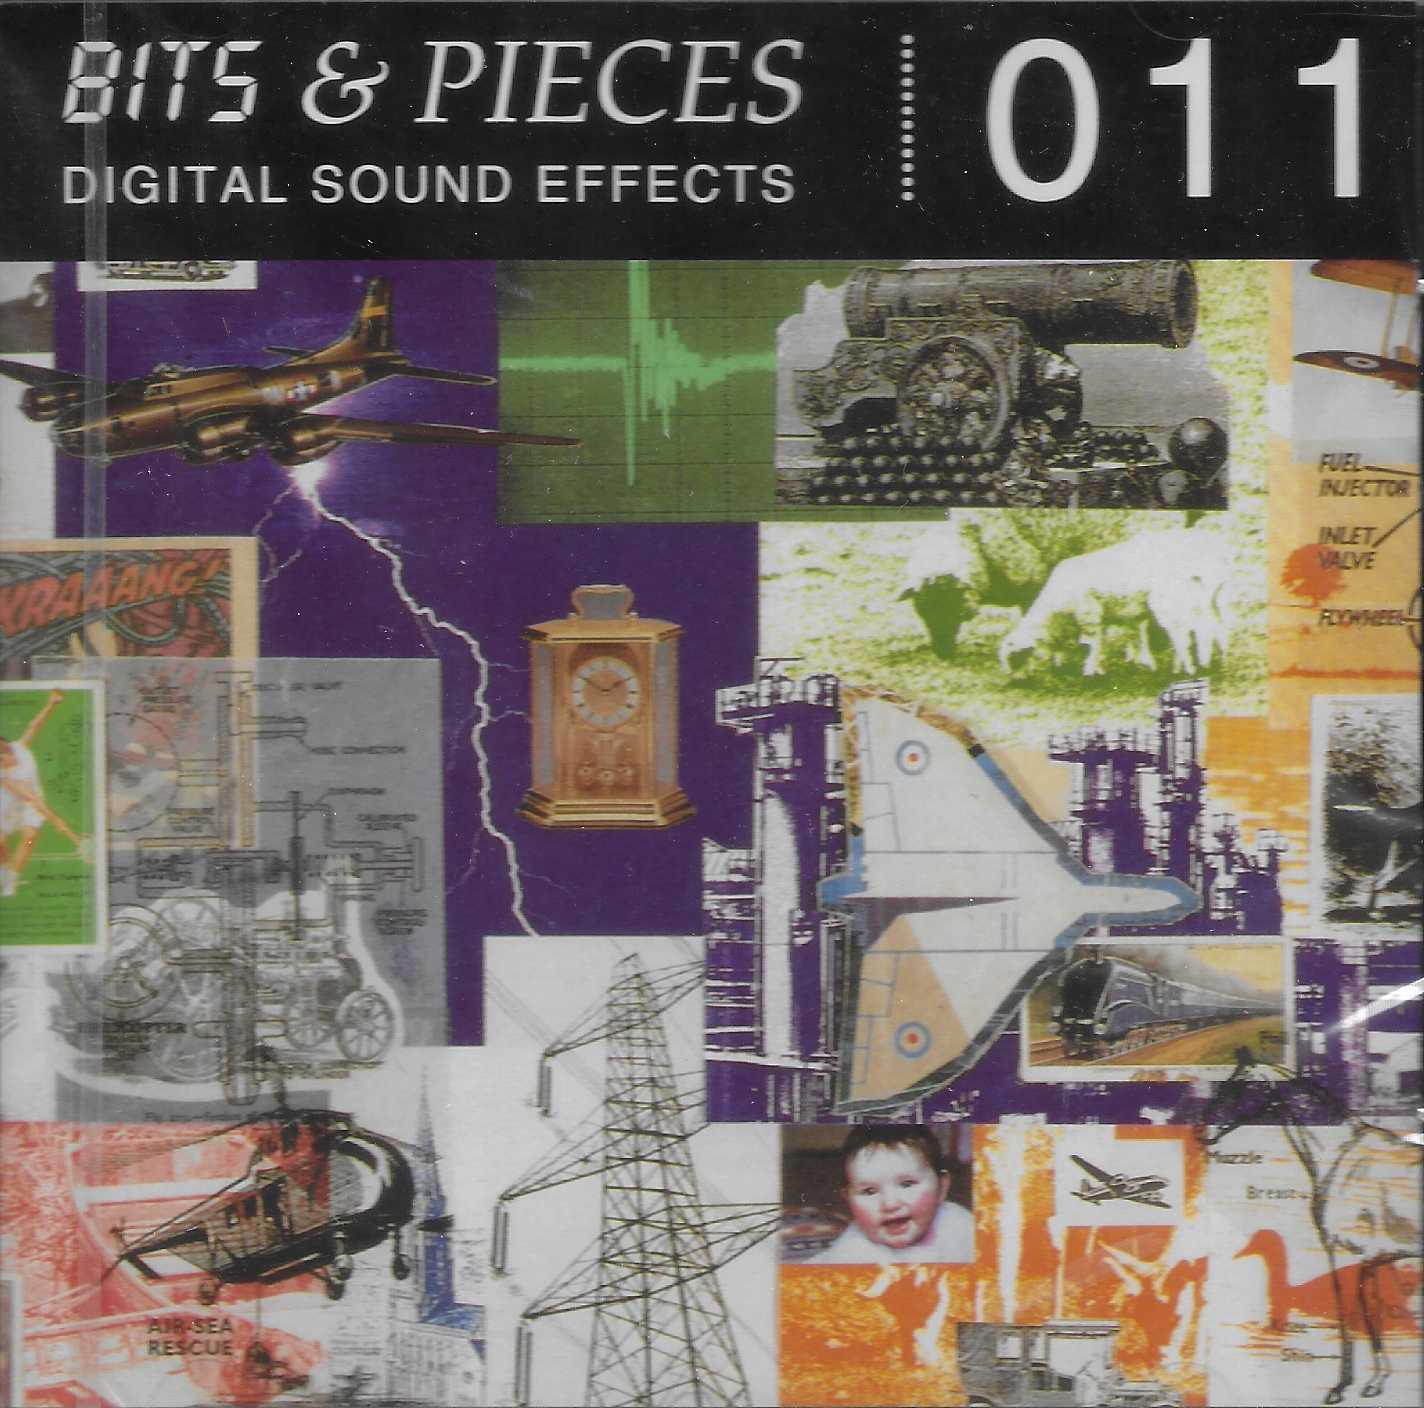 Picture of BITS 011 Bits & pieces digital sound effects 011 by artist Various